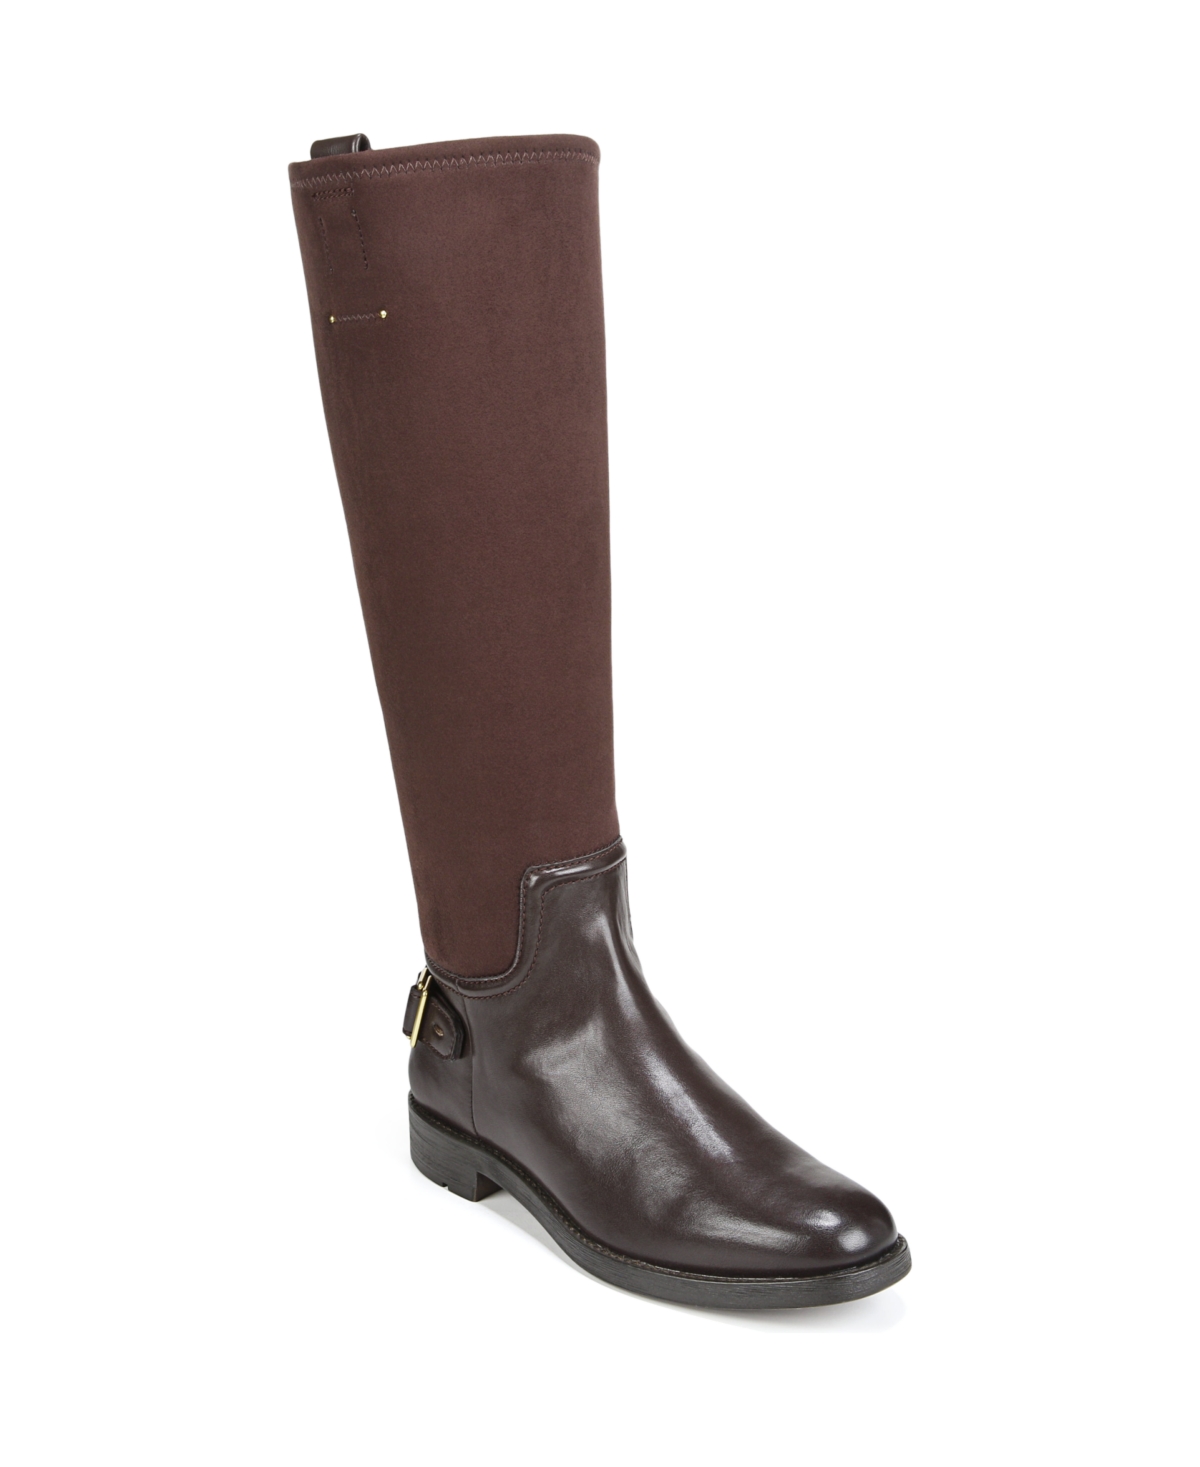 Merina Knee High Riding Boots - Black Faux Leather